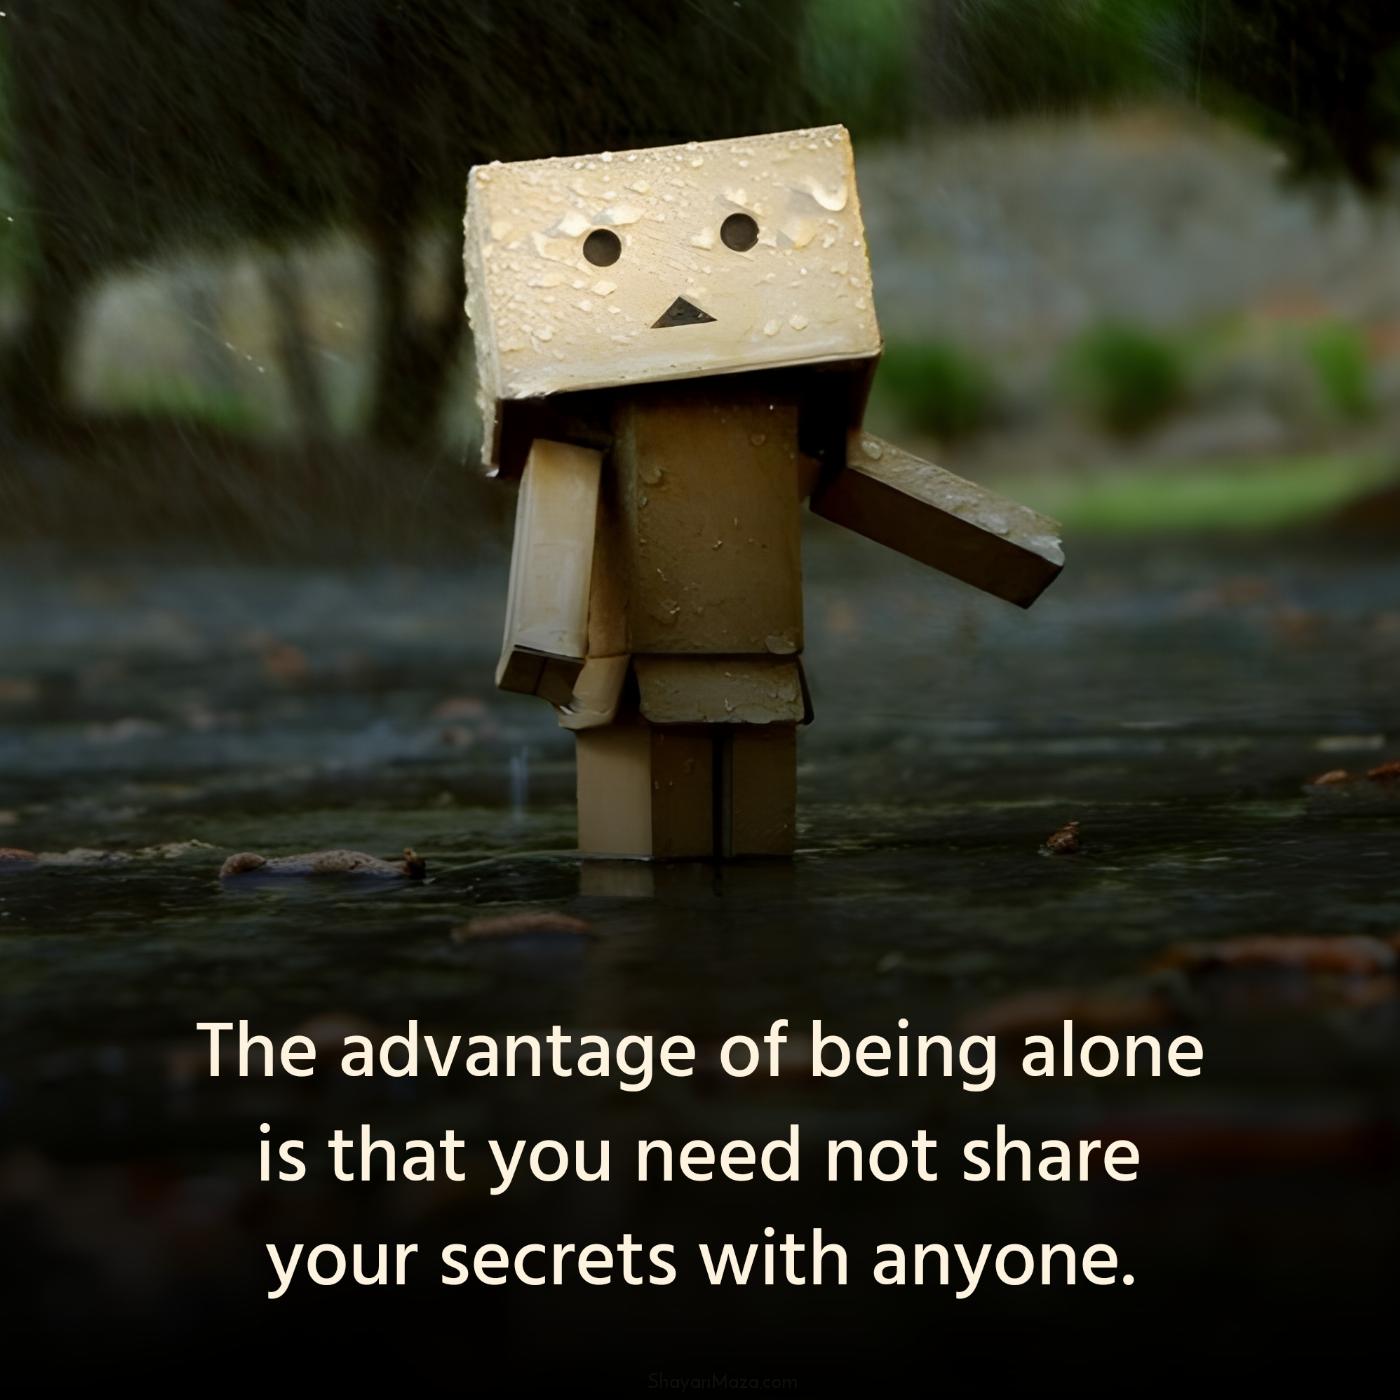 The advantage of being alone is that you need not share your secrets